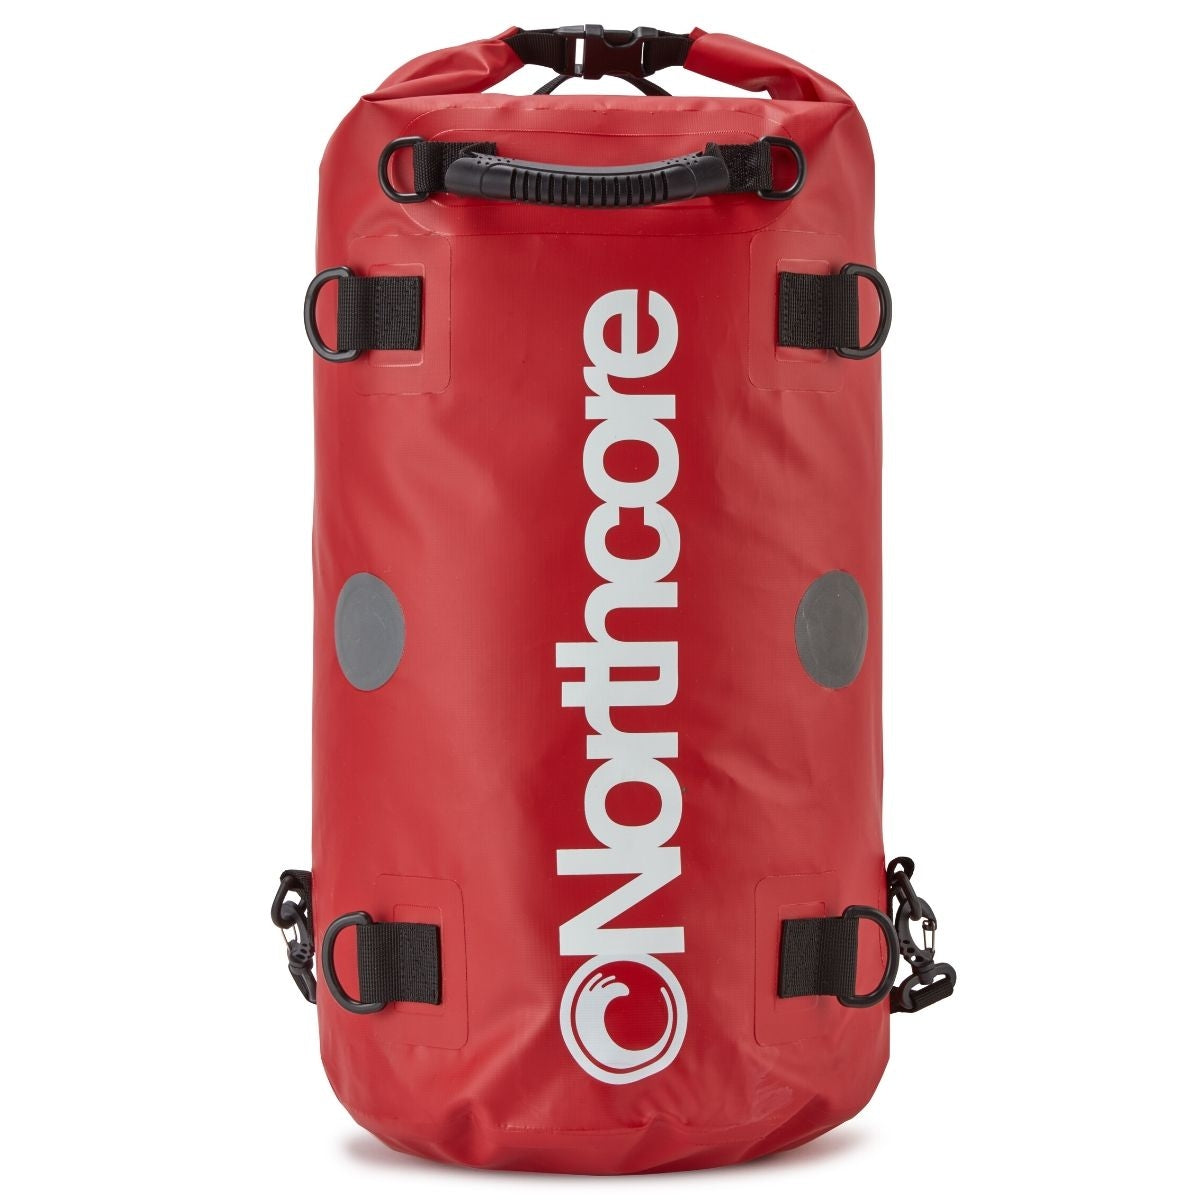 Northcore Heavy Duty Waterproof Dry Bag Backpack 40L Red